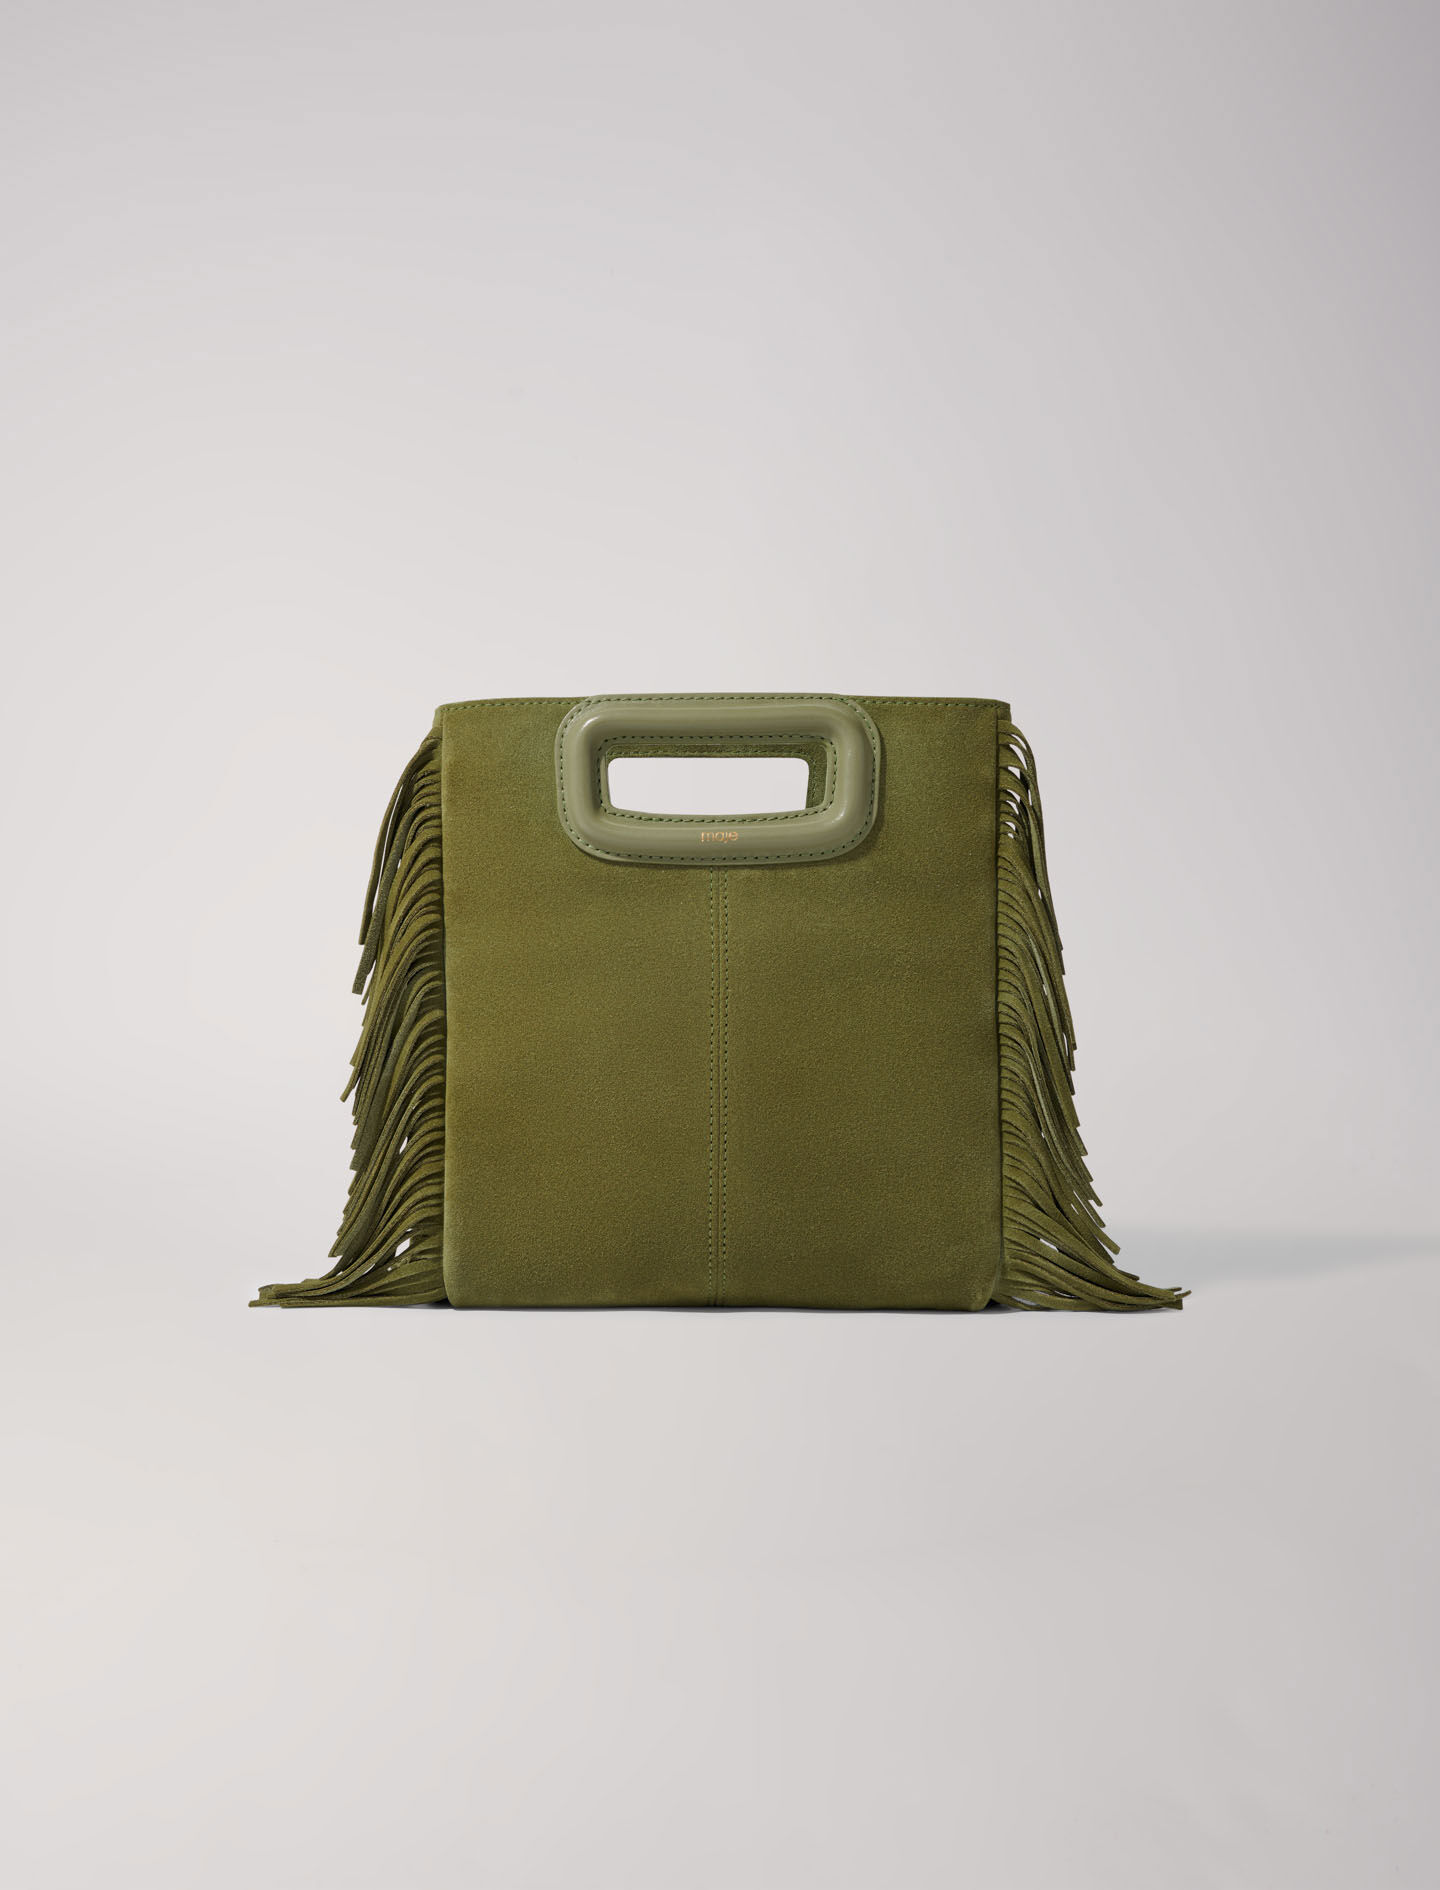 M bag in suede leather